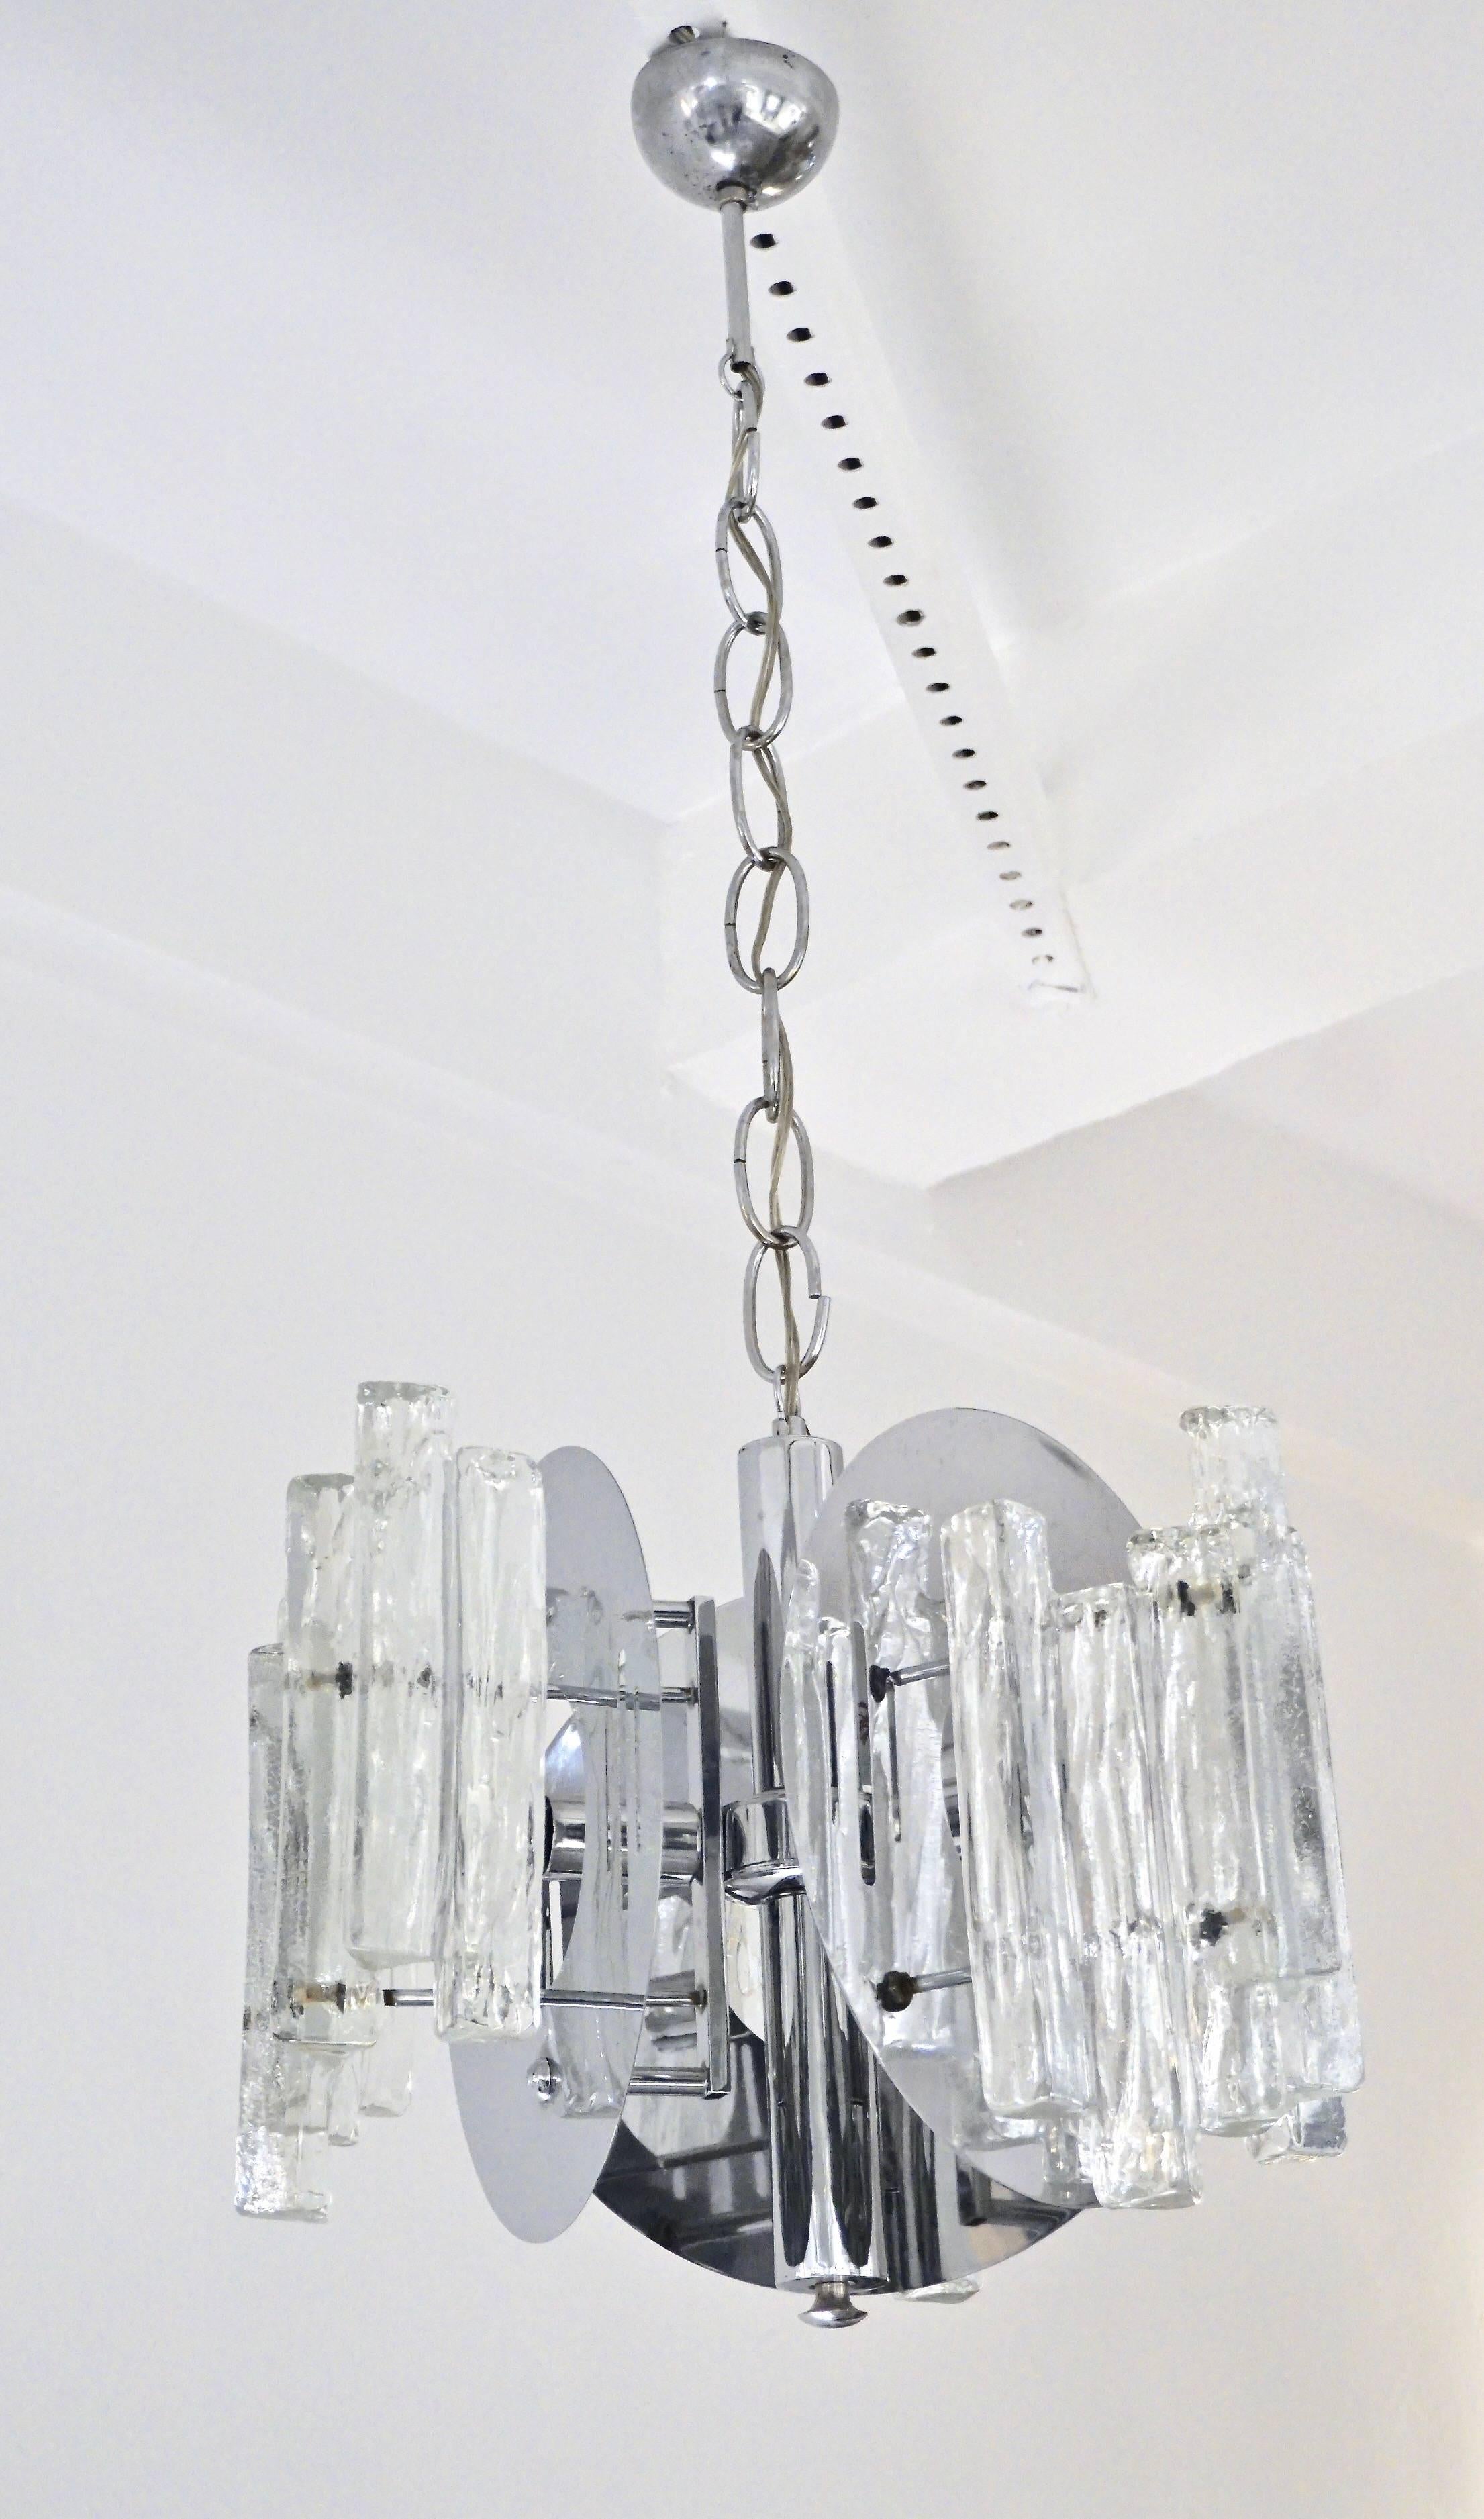 Very attractive modernist and organic Design for this 1970s Murano glass high quality chandelier by Salviati: the manufactured chrome round plates, that are pierced to let the light shine through, are decorated with Murano glass faceted and textured